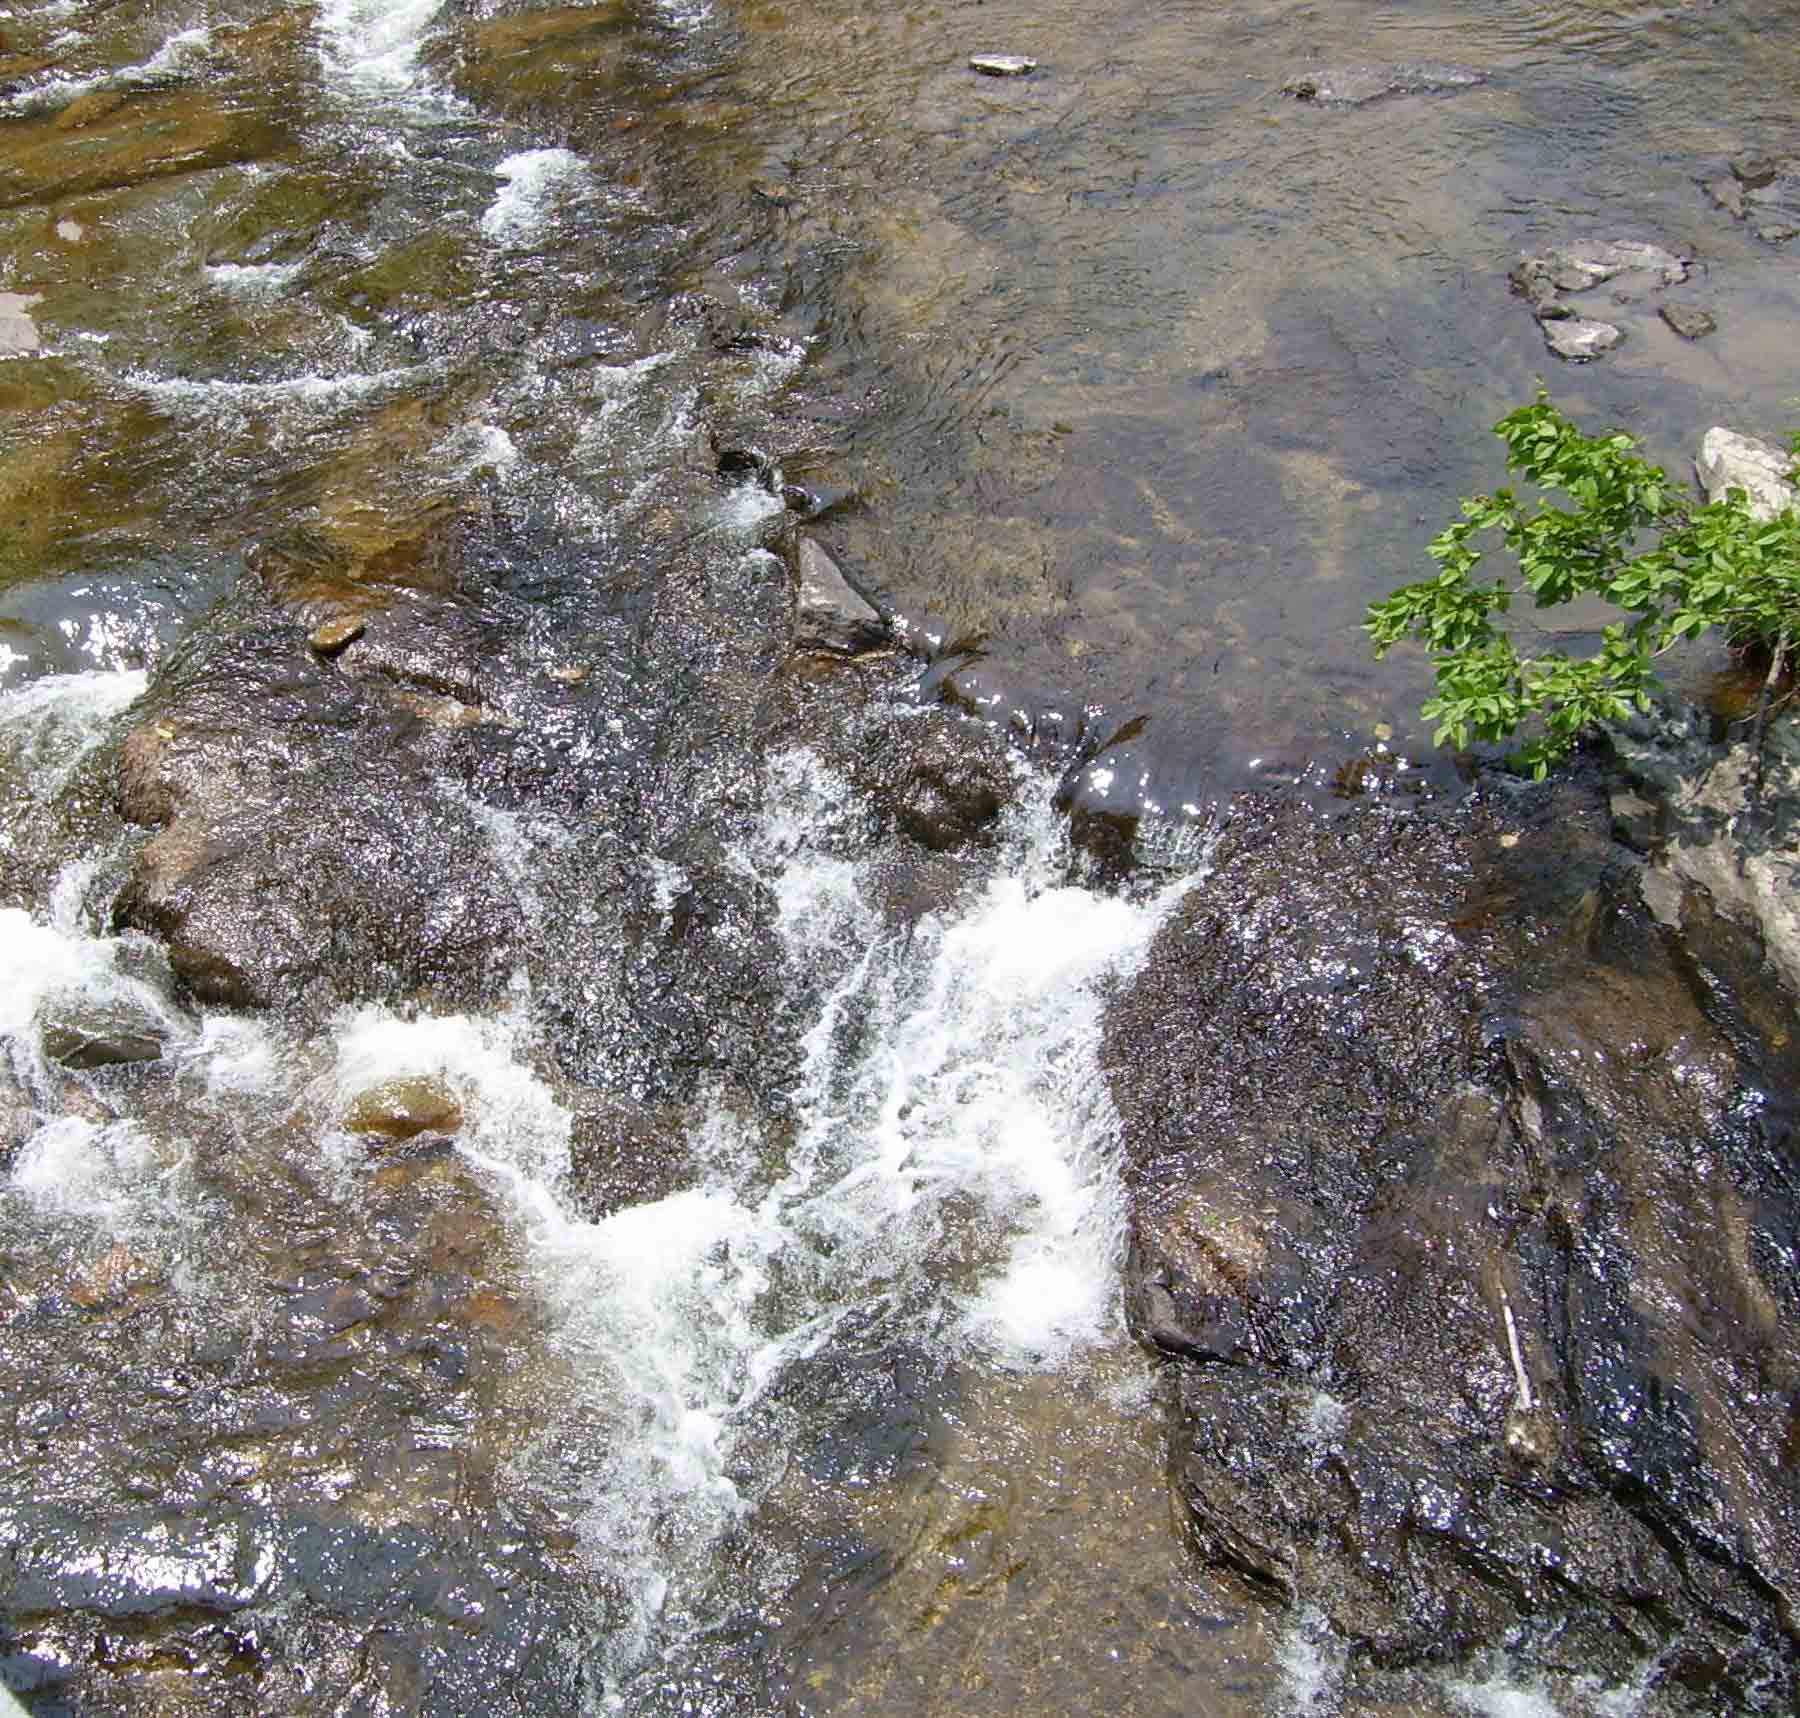 mm 0.0 - Small cascade on Jennings Creek as seen from the Panther Ford Bridge on VA 614.  Courtesy dlcul@conncoll.edu